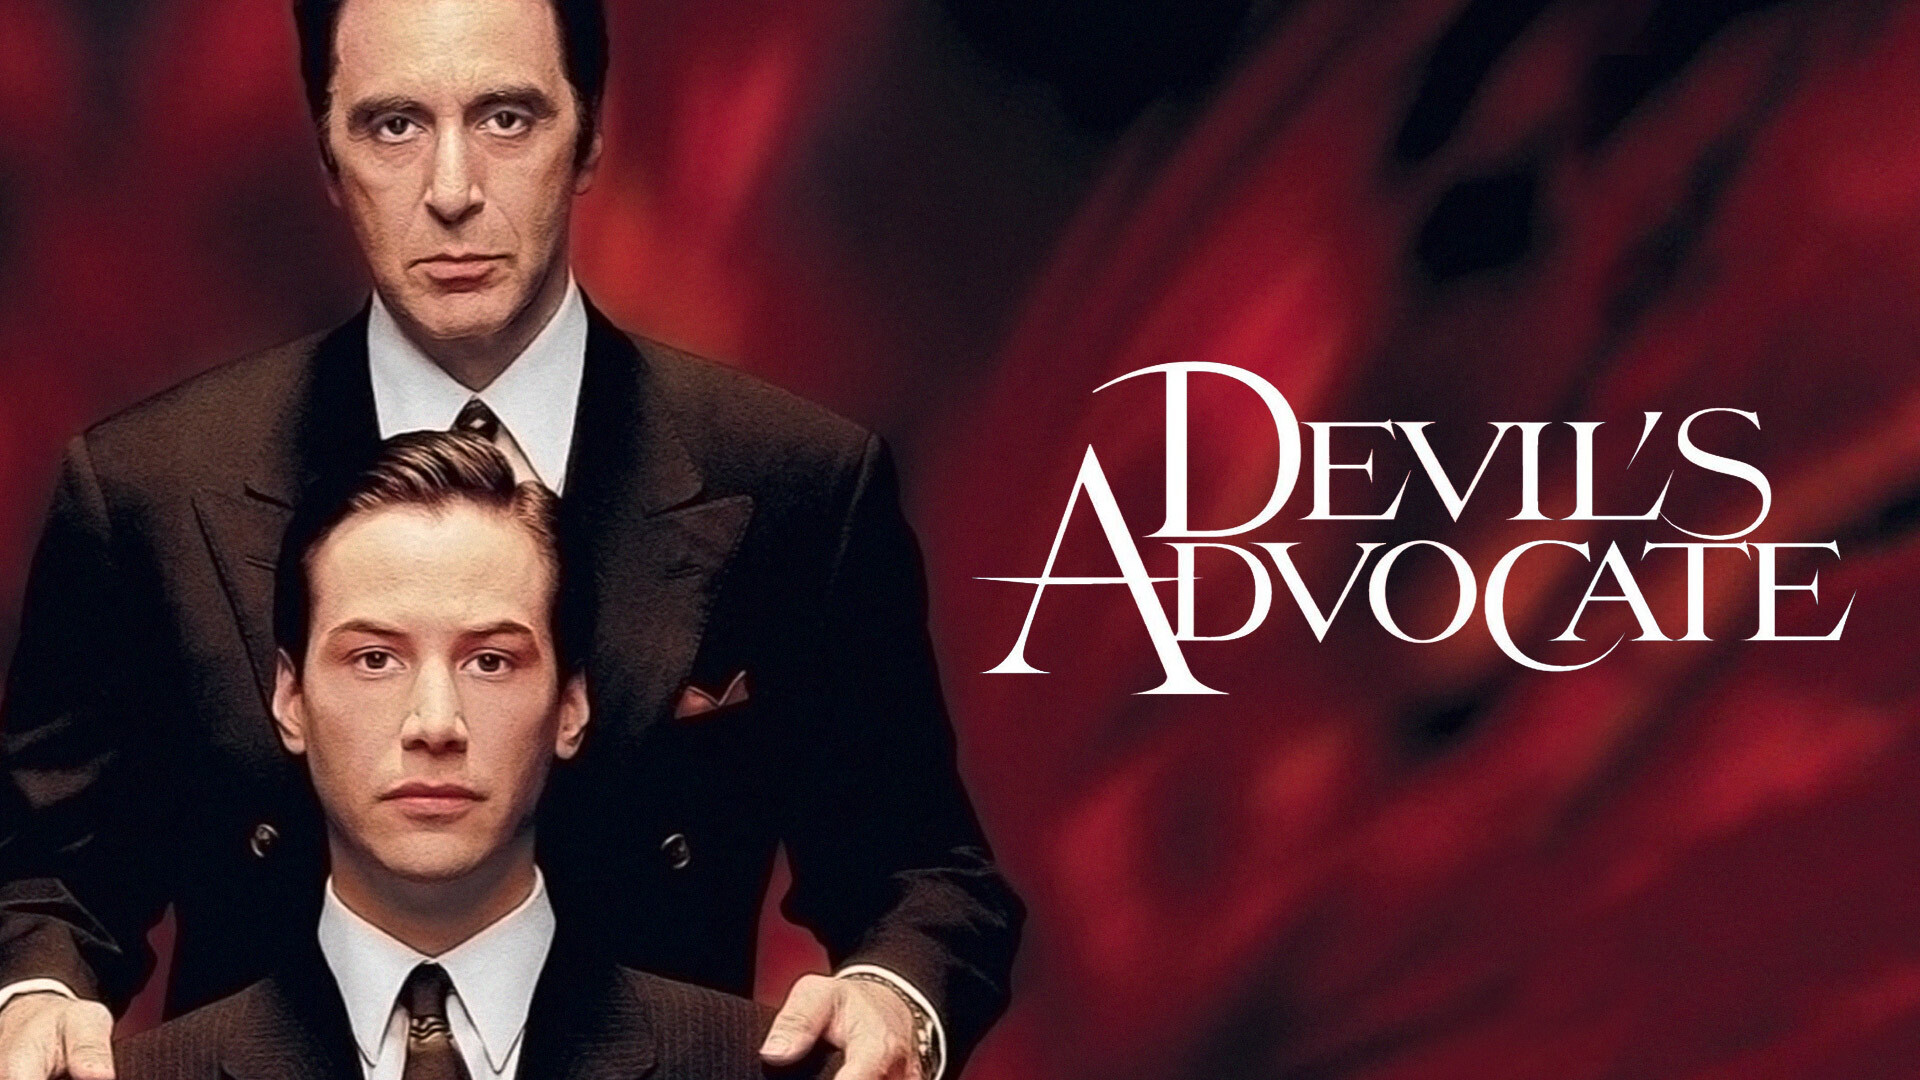 The Devil's Advocate (Movie): Al Pacino as John Milton aka Satan, Keanu Reeves as Kevin Lomax, A 1997 film distributed by Warner Bros. 1920x1080 Full HD Background.